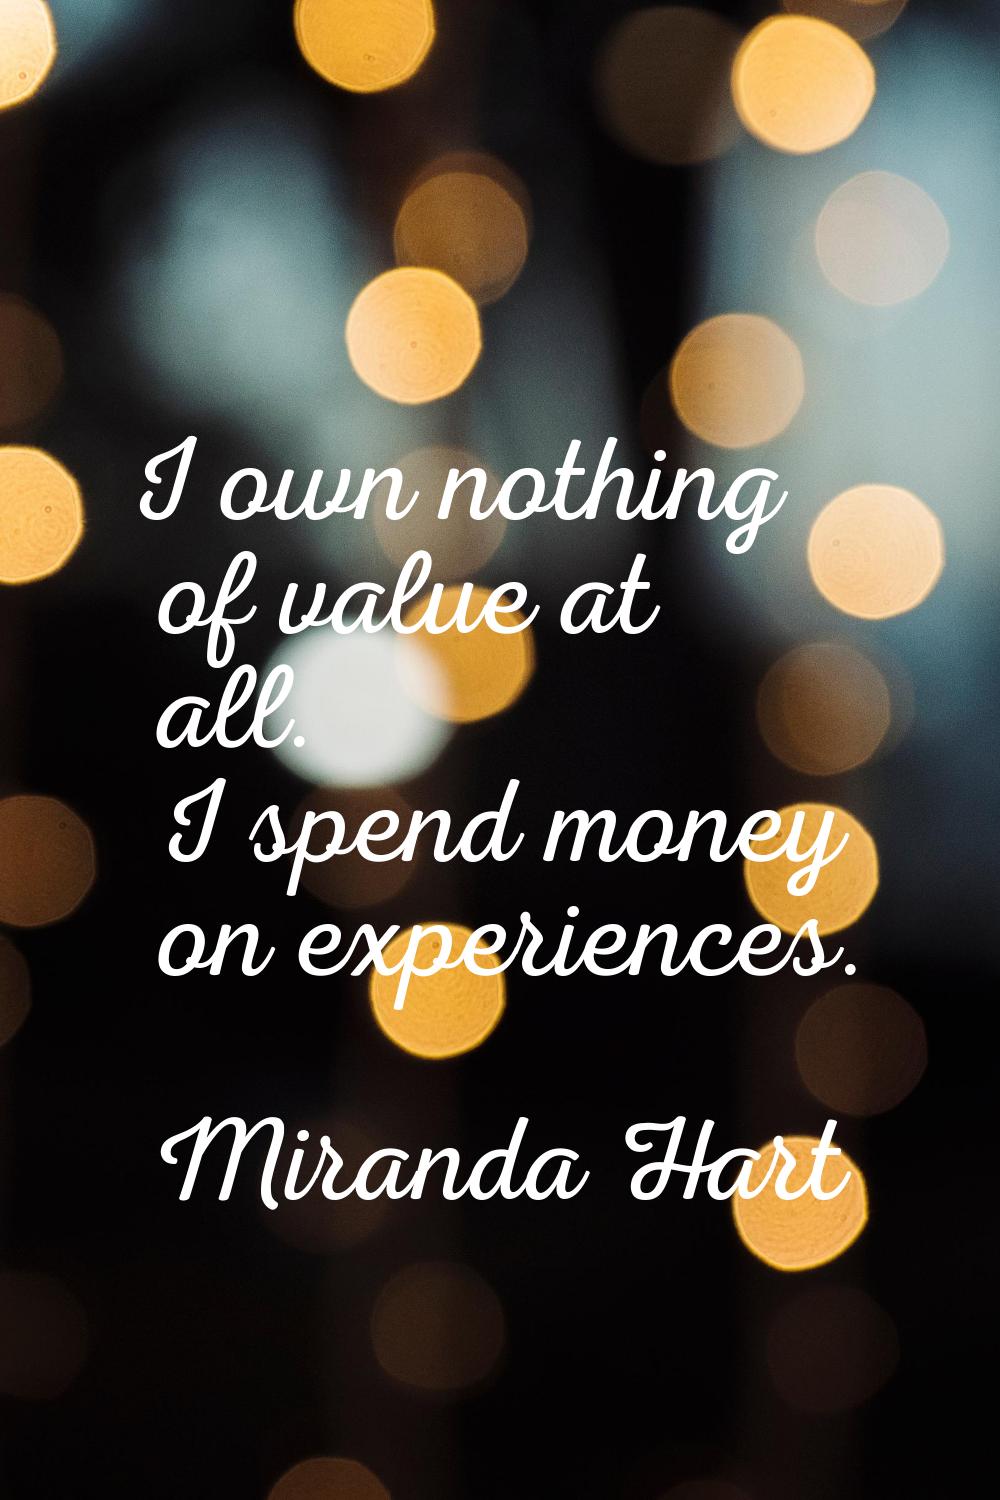 I own nothing of value at all. I spend money on experiences.